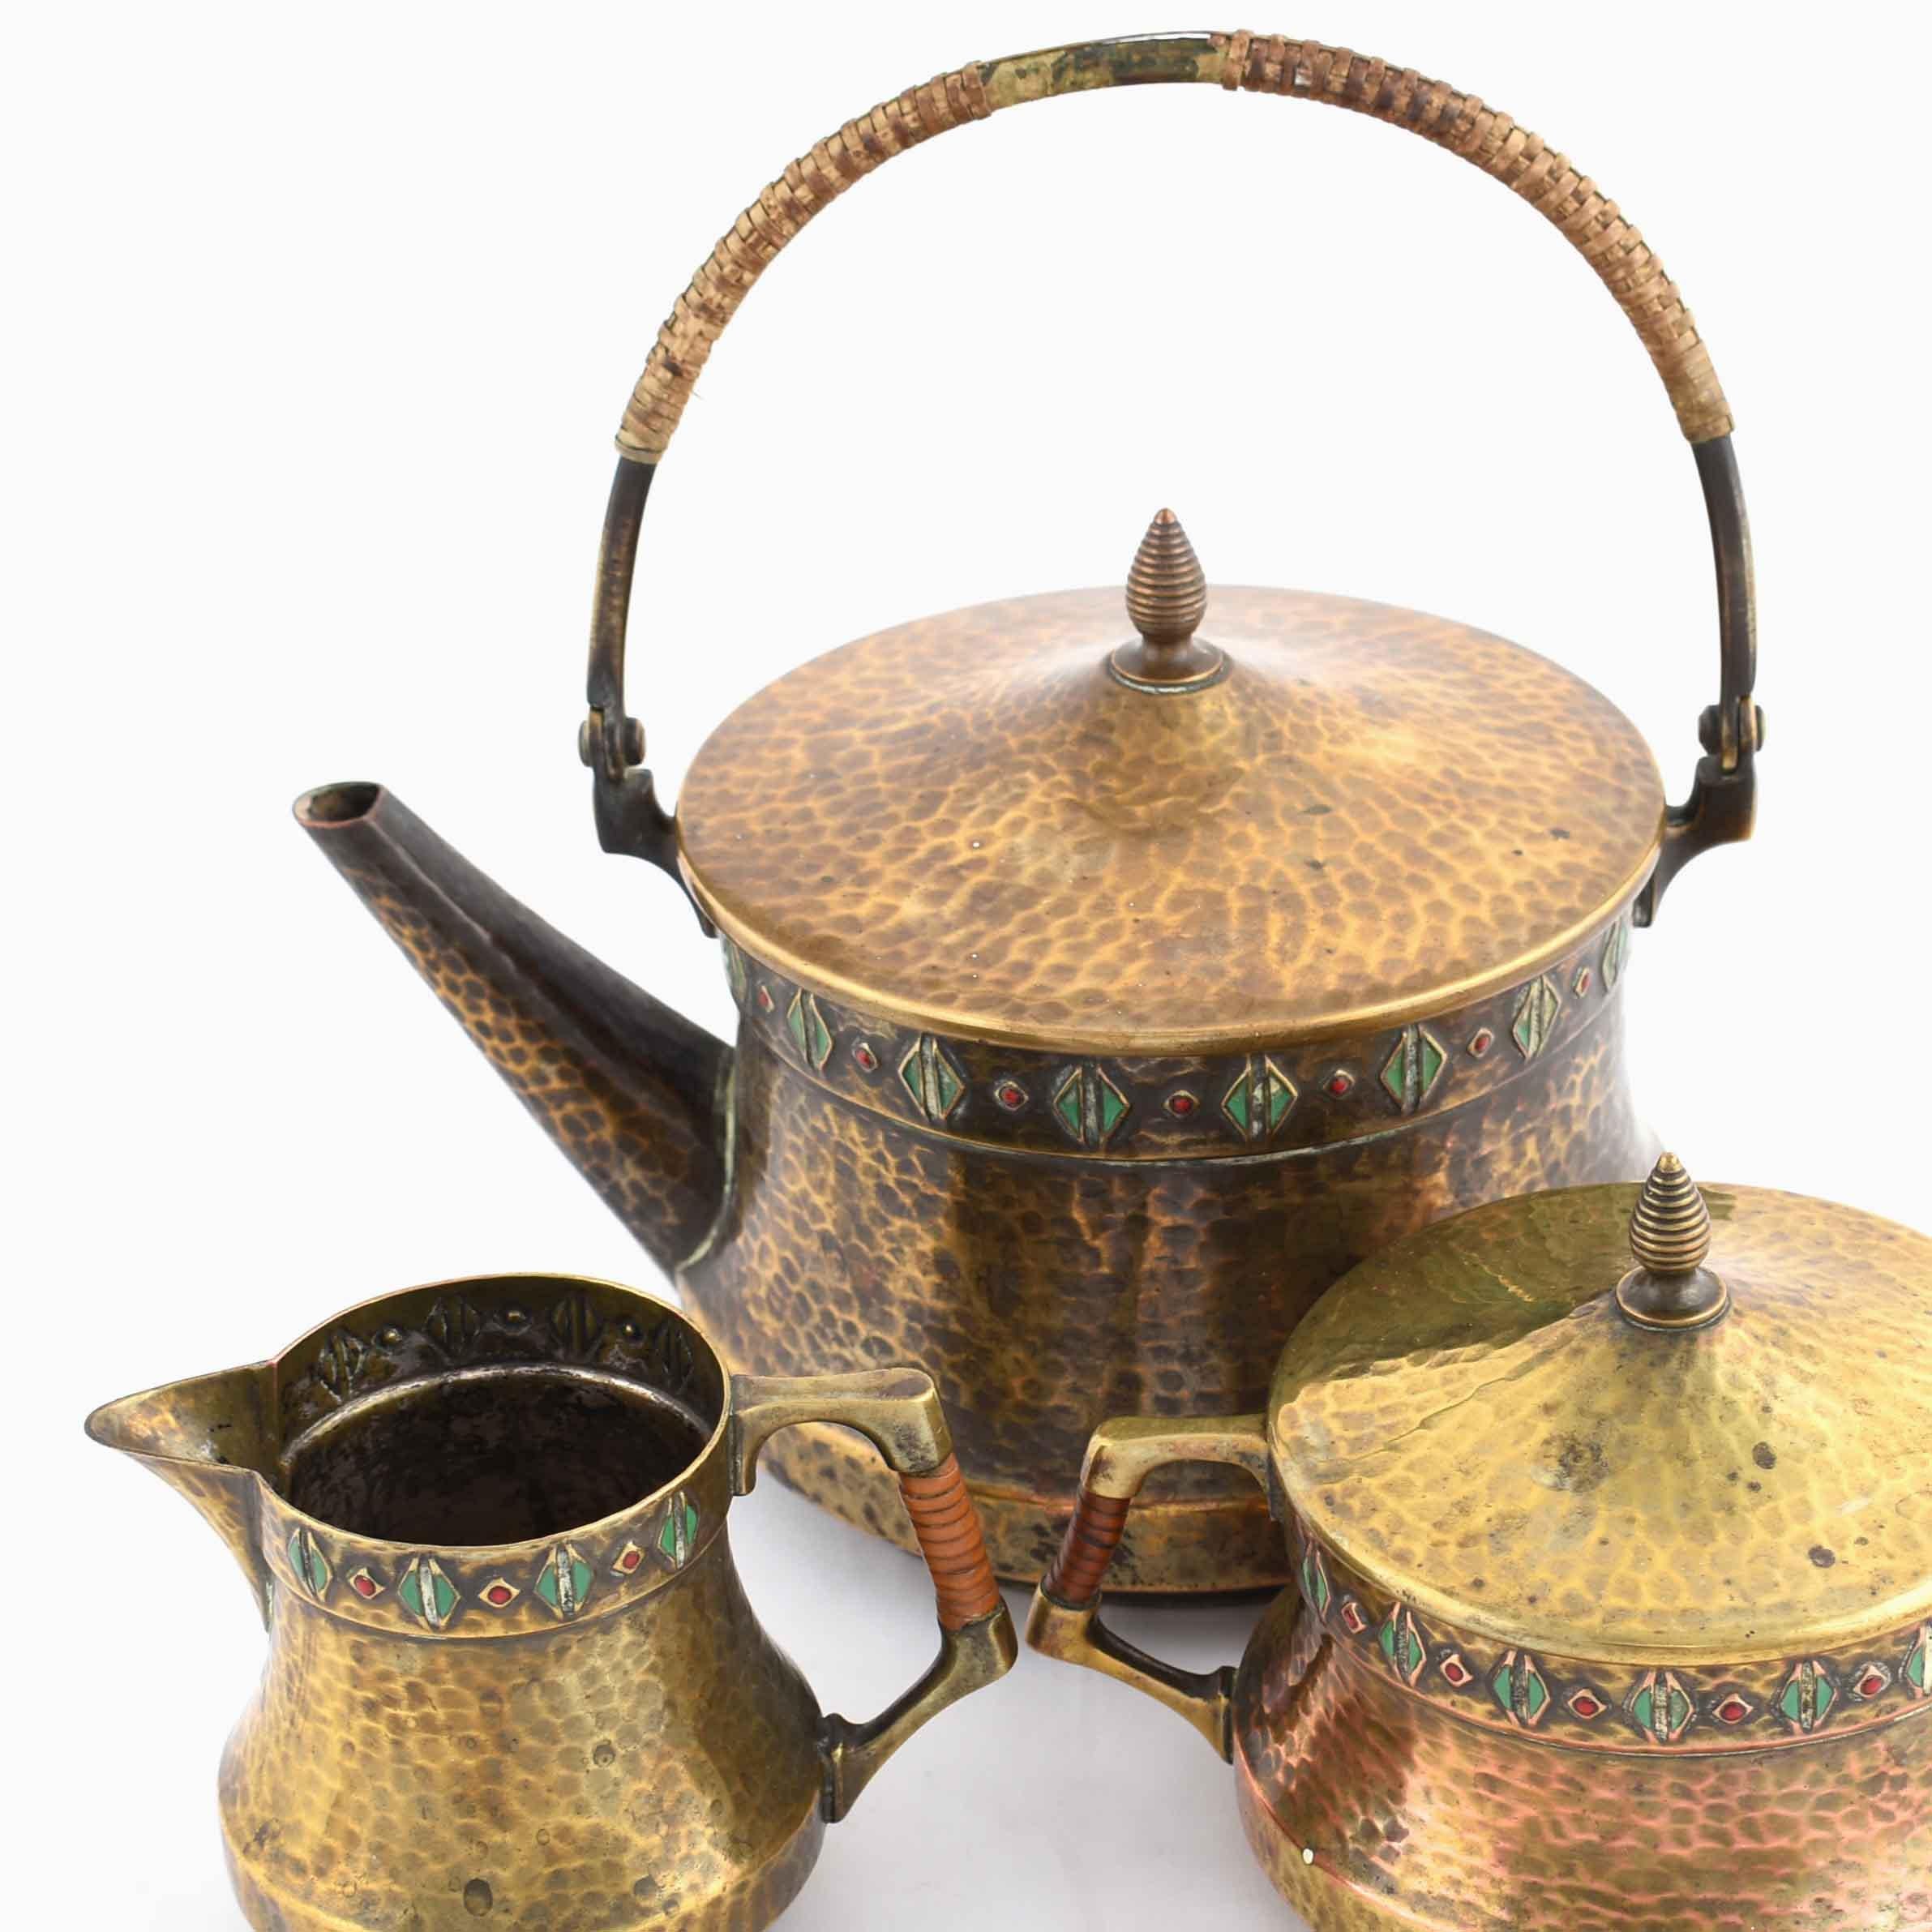 Jugendstil tea set is an original group of decorative objects realized in the 1910s.

Original decorated brass.

Realized by WMF. Made in Germany. 

The set includes: a coffee pot, a sugar bowl and a cream server.

Very good conditions.